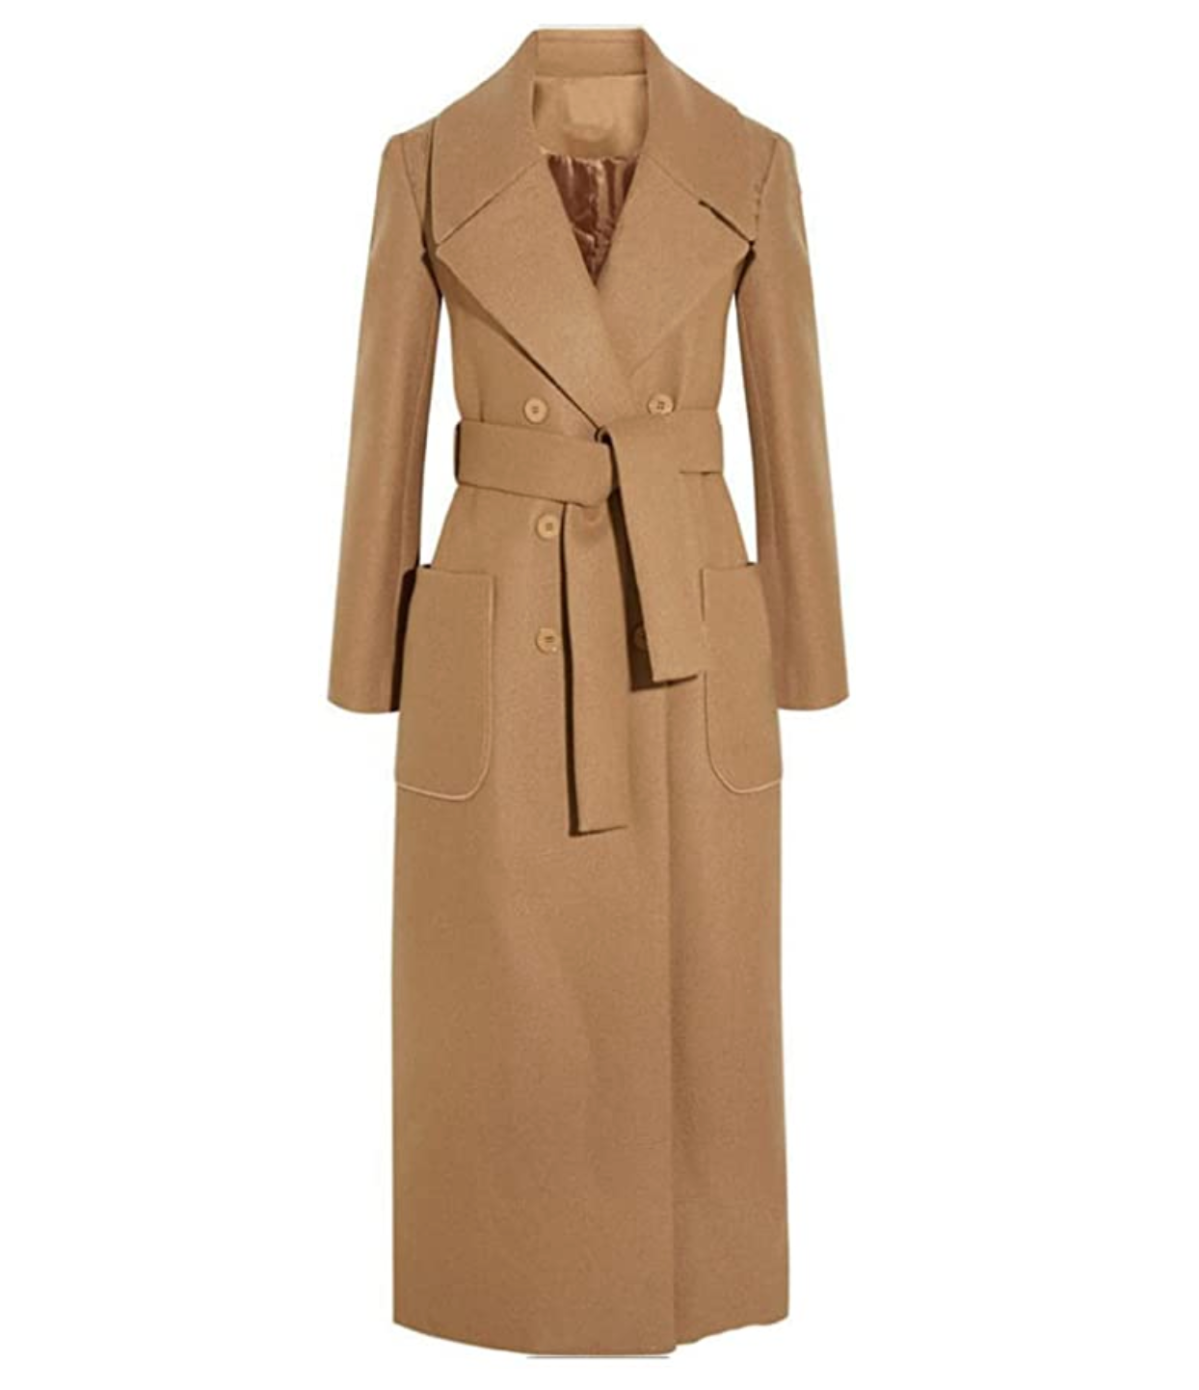 Channel Duchess Kate's Style With This Camel Coat | Us Weekly